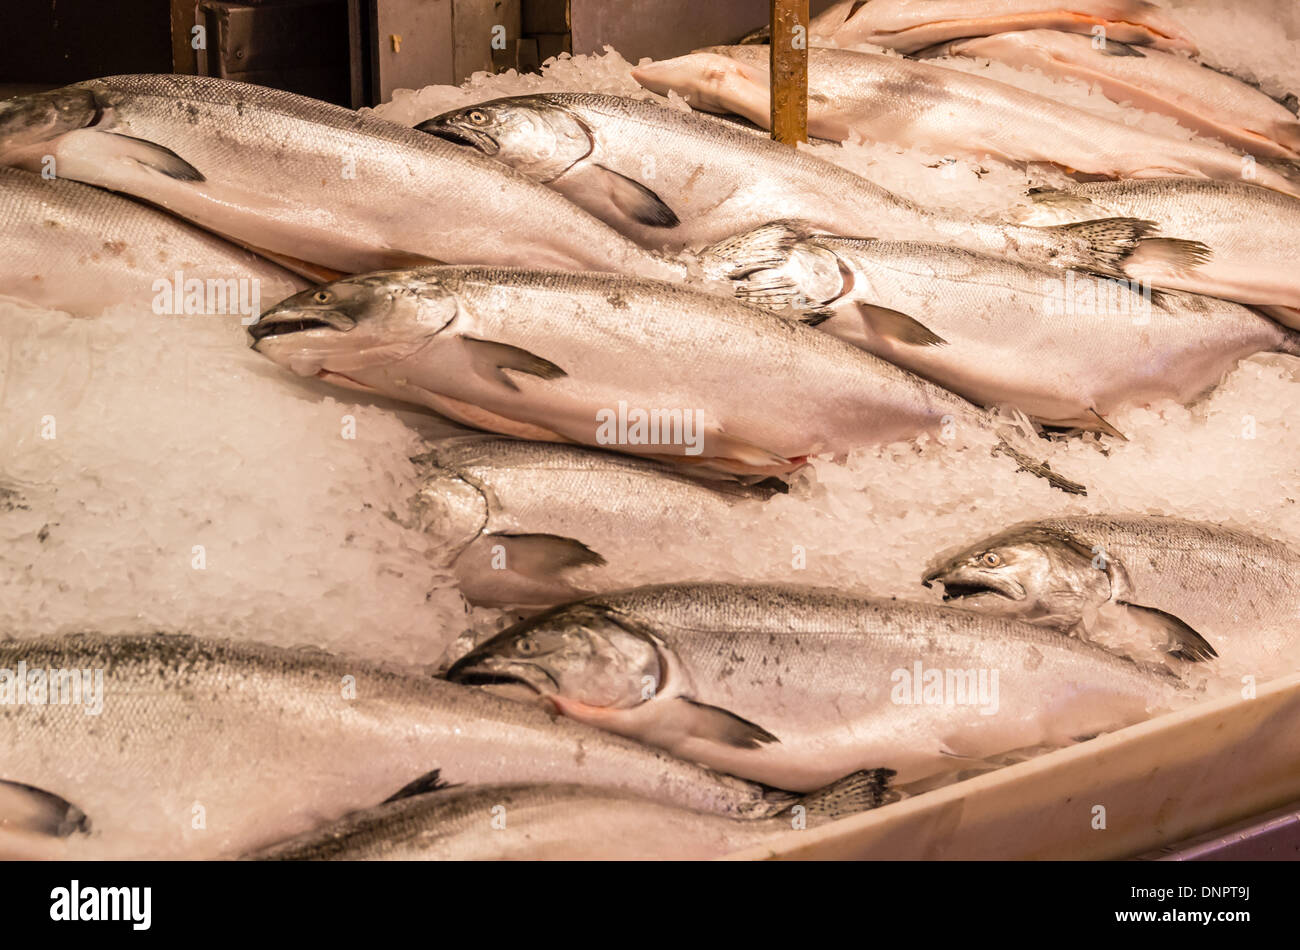 Fresh King Salmon on ice in a fish monger's stall Pike Place Market Seattle , Washington, USA Stock Photo